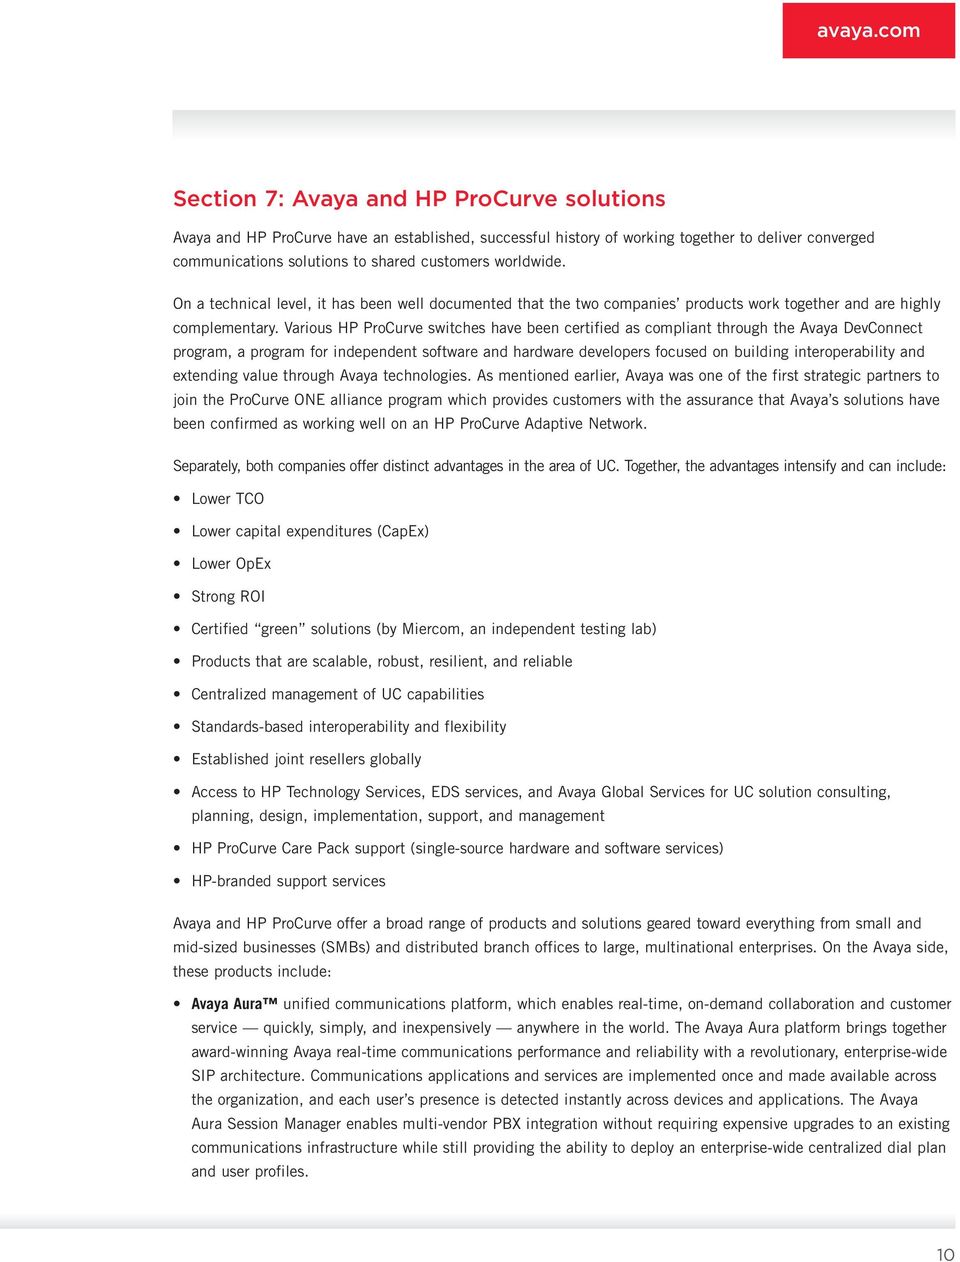 Various HP ProCurve switches have been certified as compliant through the Avaya DevConnect program, a program for independent software and hardware developers focused on building interoperability and